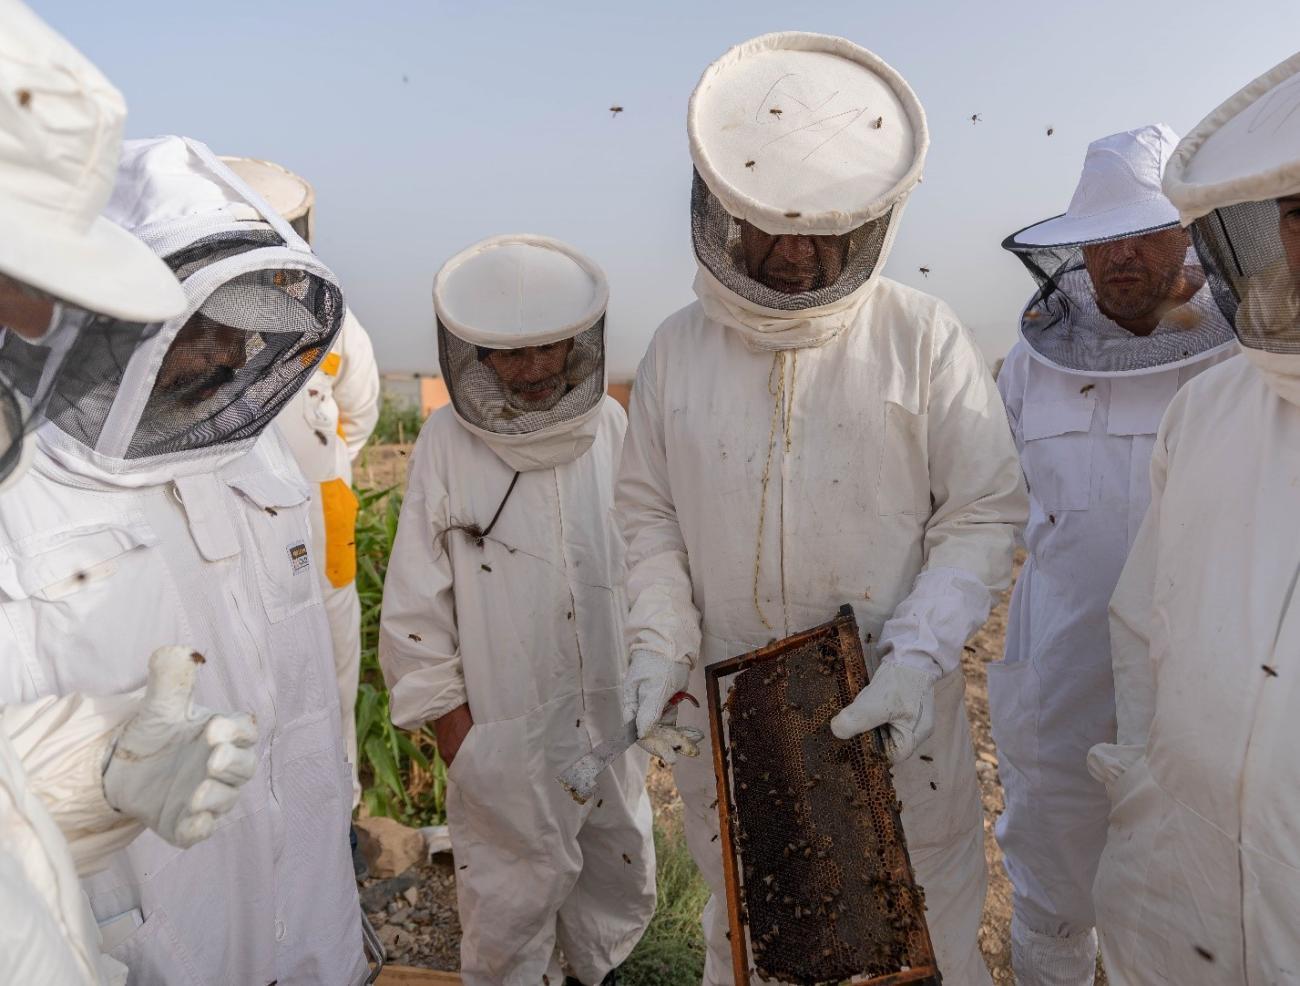 Beekeepers wearing protective suits and inspecting the bee hive.